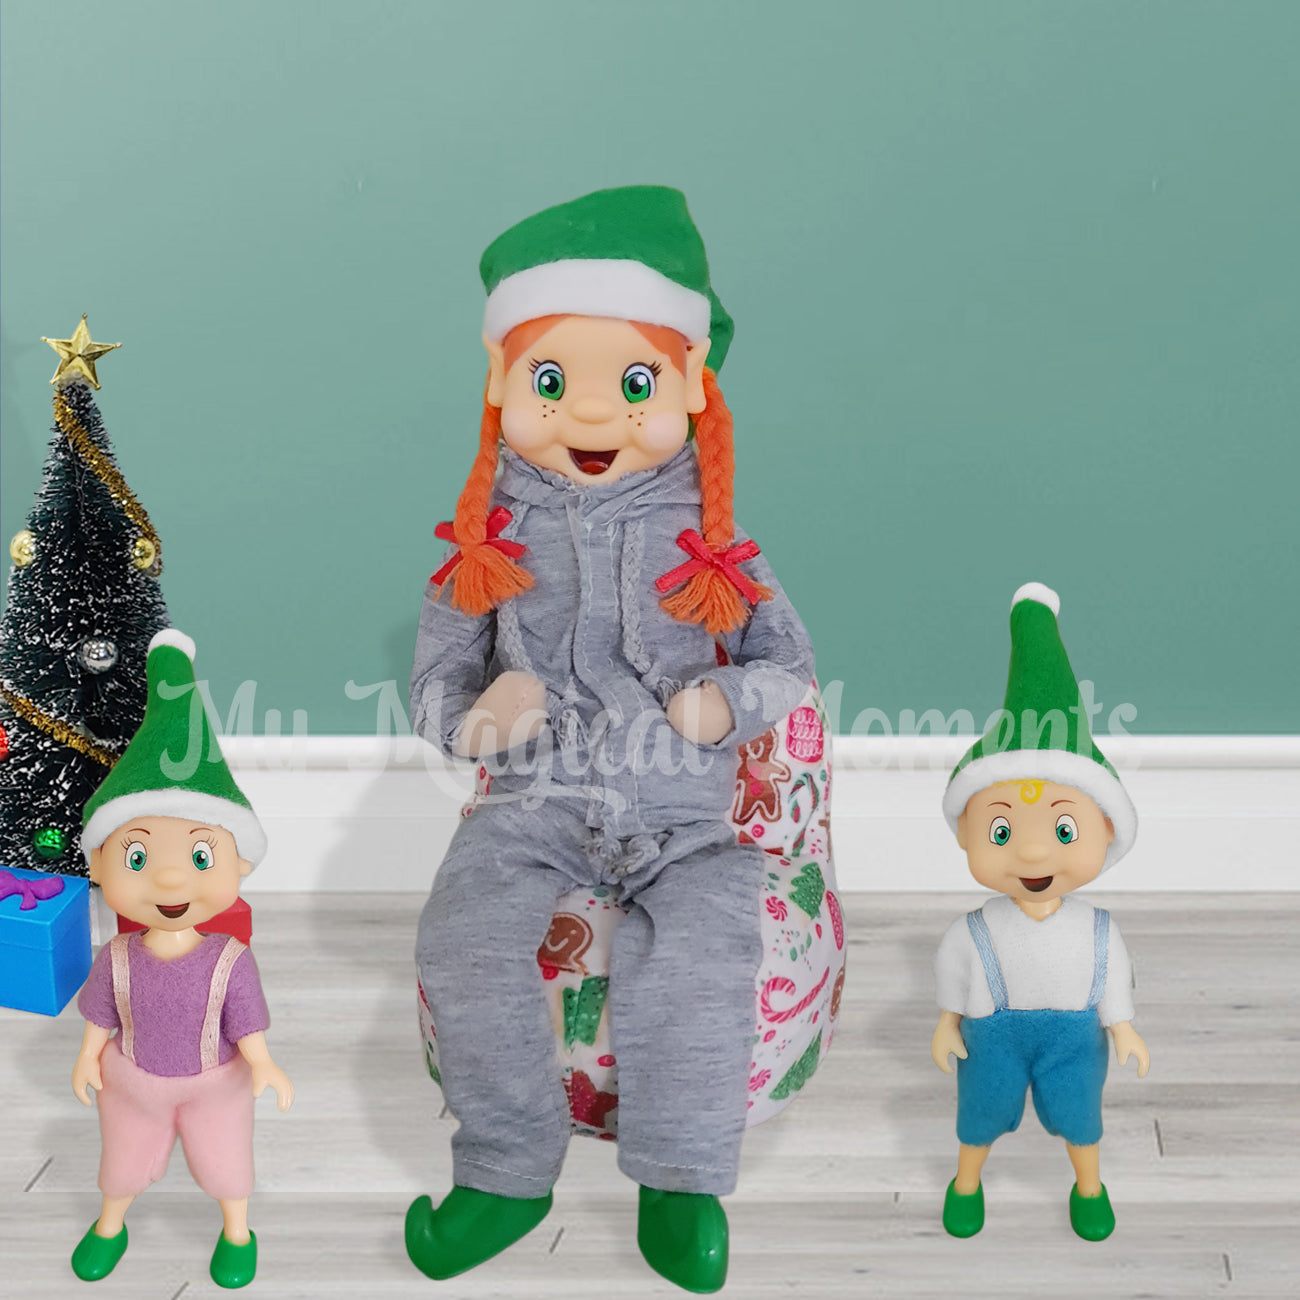 Tracksuit wearing elf sitting on a bean bag with elf toddlers next to her